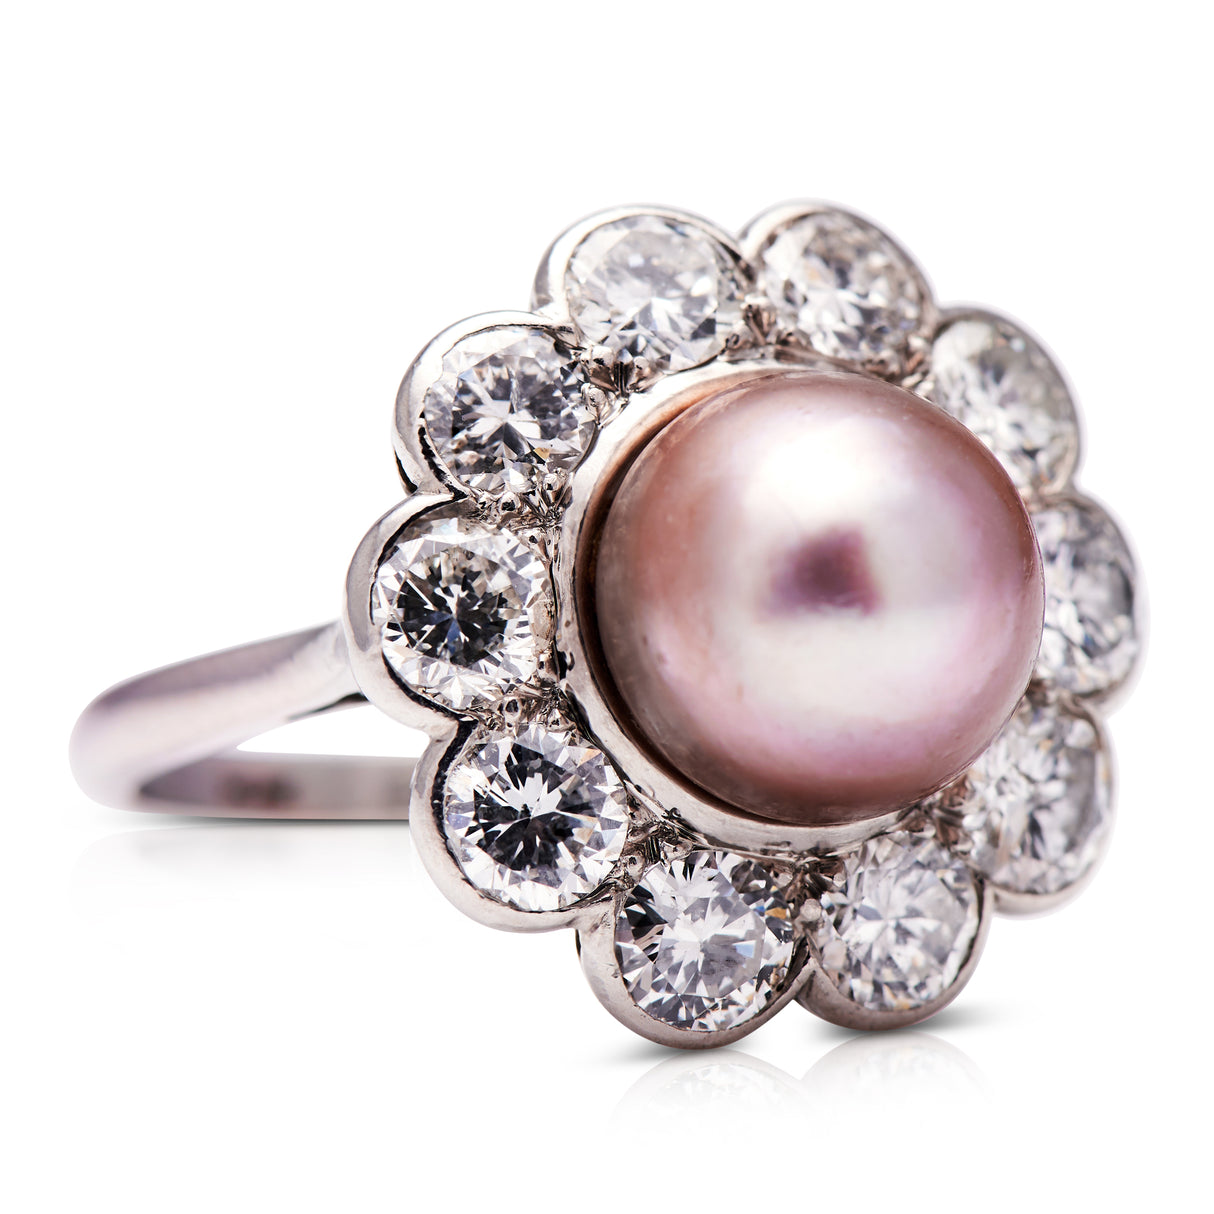 1900 Antique Natural Pearl and Diamond Ring | Antique_Rings | Antique_Pearl_ringsAntique natural pearl and diamond ring, side view. 